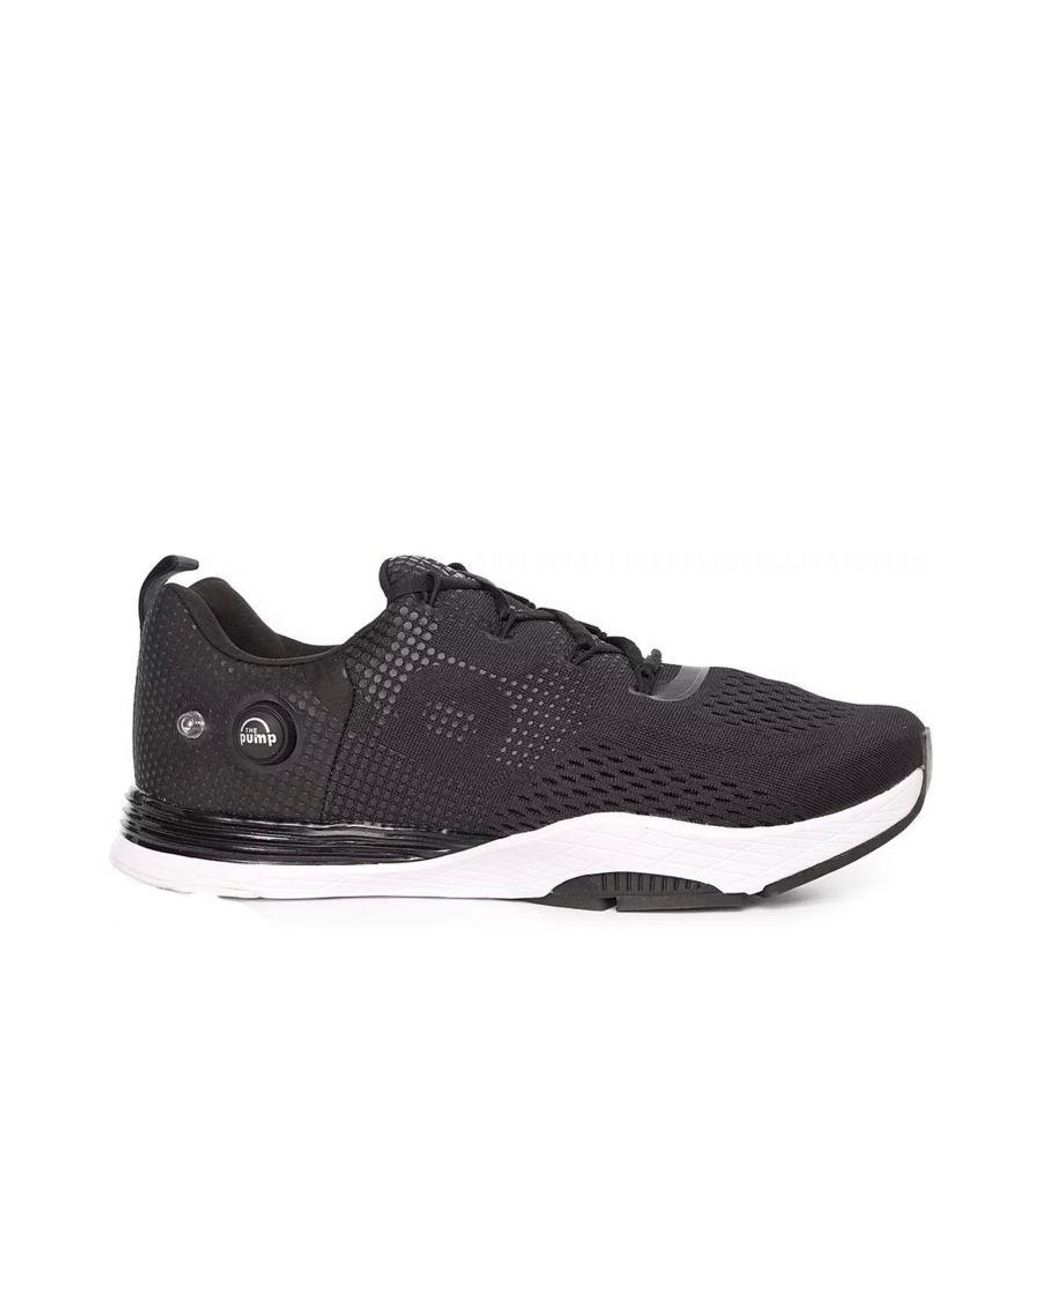 zeven Peregrination Illusie Reebok Less Mills Cardio Pump Fusion Lace-up Black Synthetic Running  Trainers V66765 for Men | Lyst UK